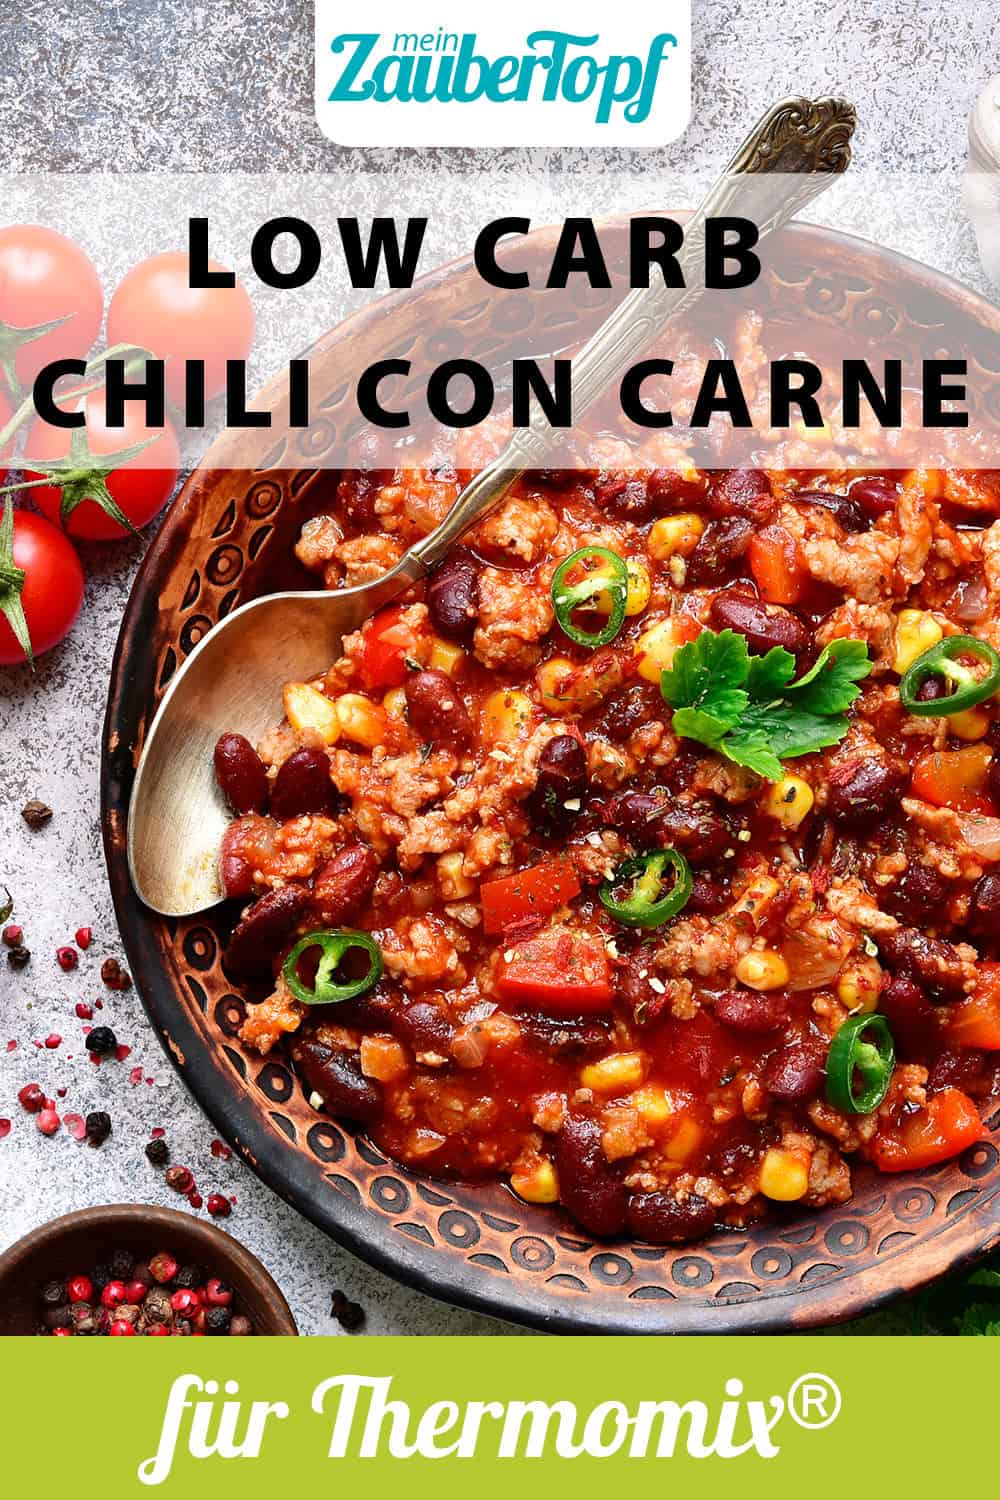 Low Carb Chili con Carne mit dem Thermomix® – Foto: gettyimages / Lilechka75